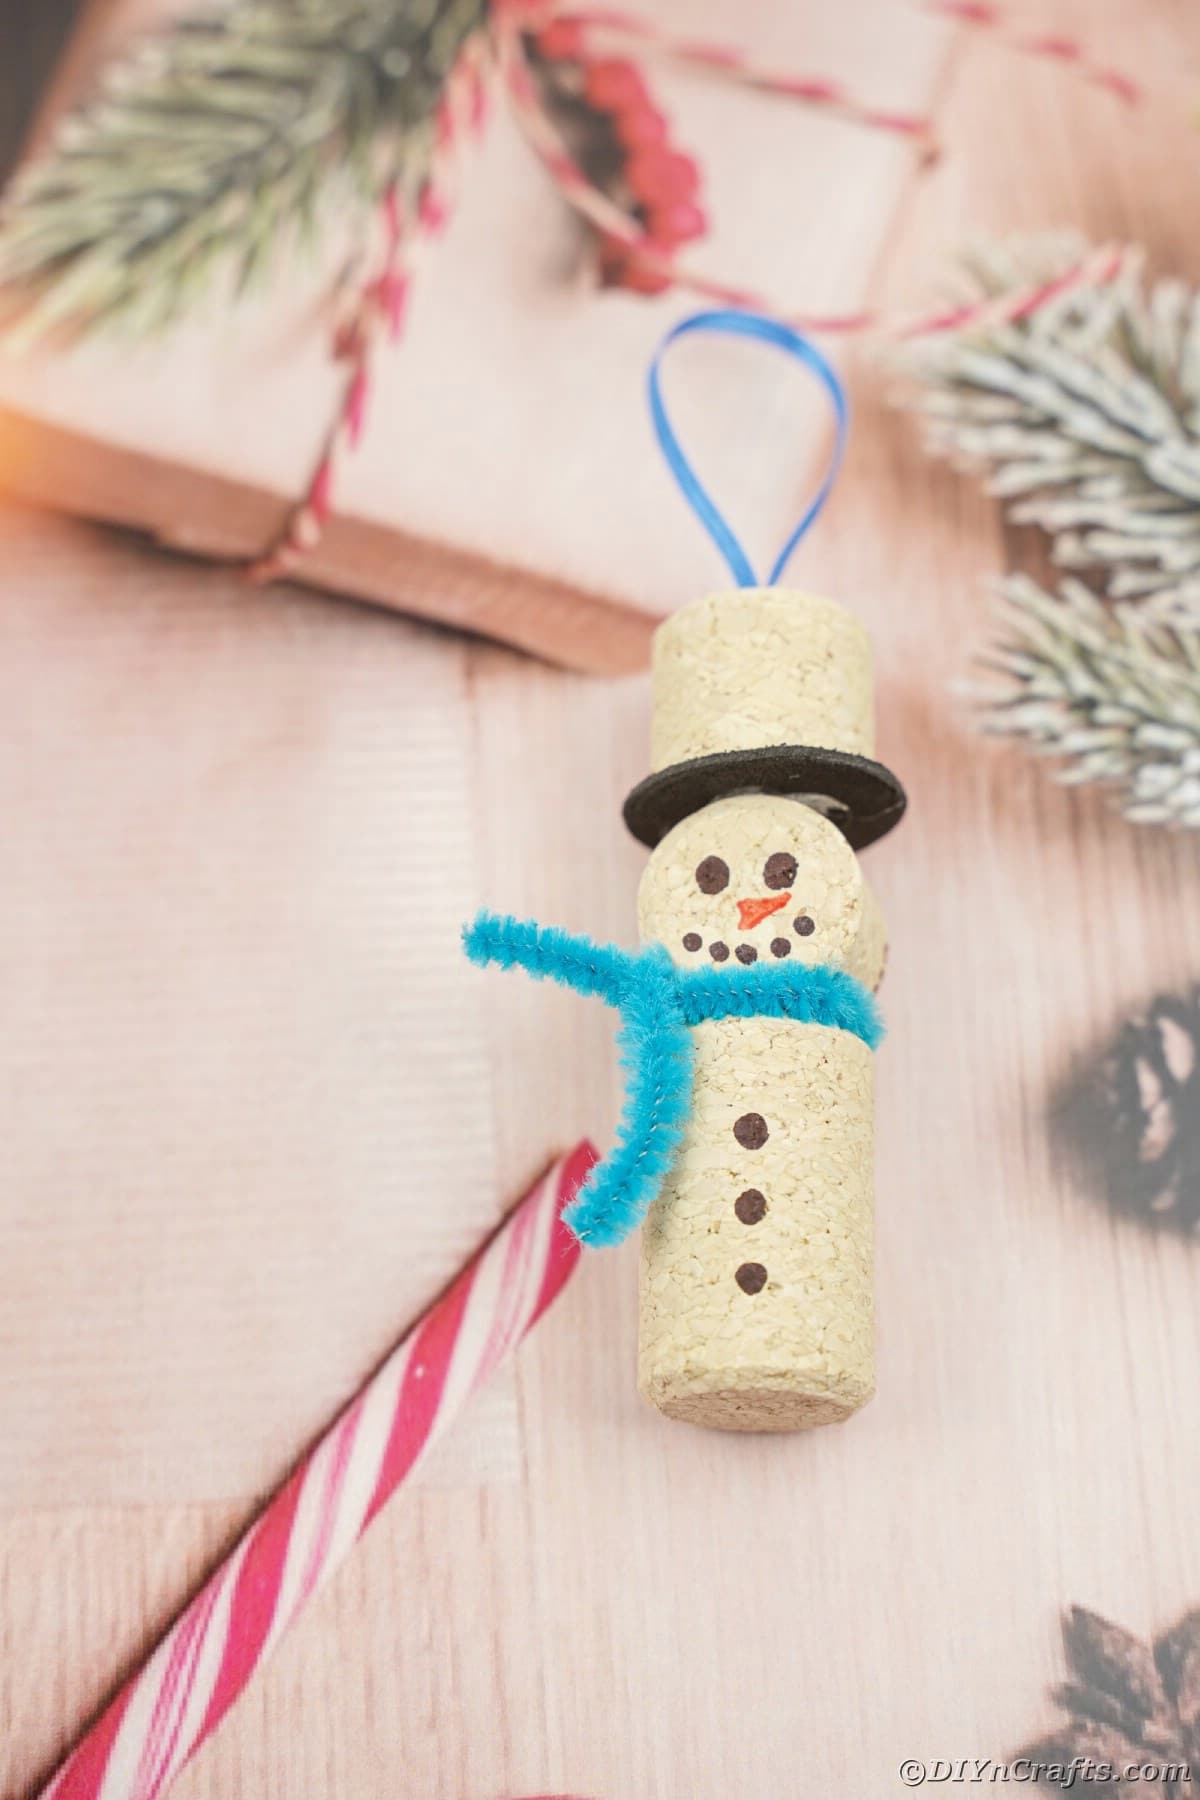 wine cork snowman ornament on holiday table paper